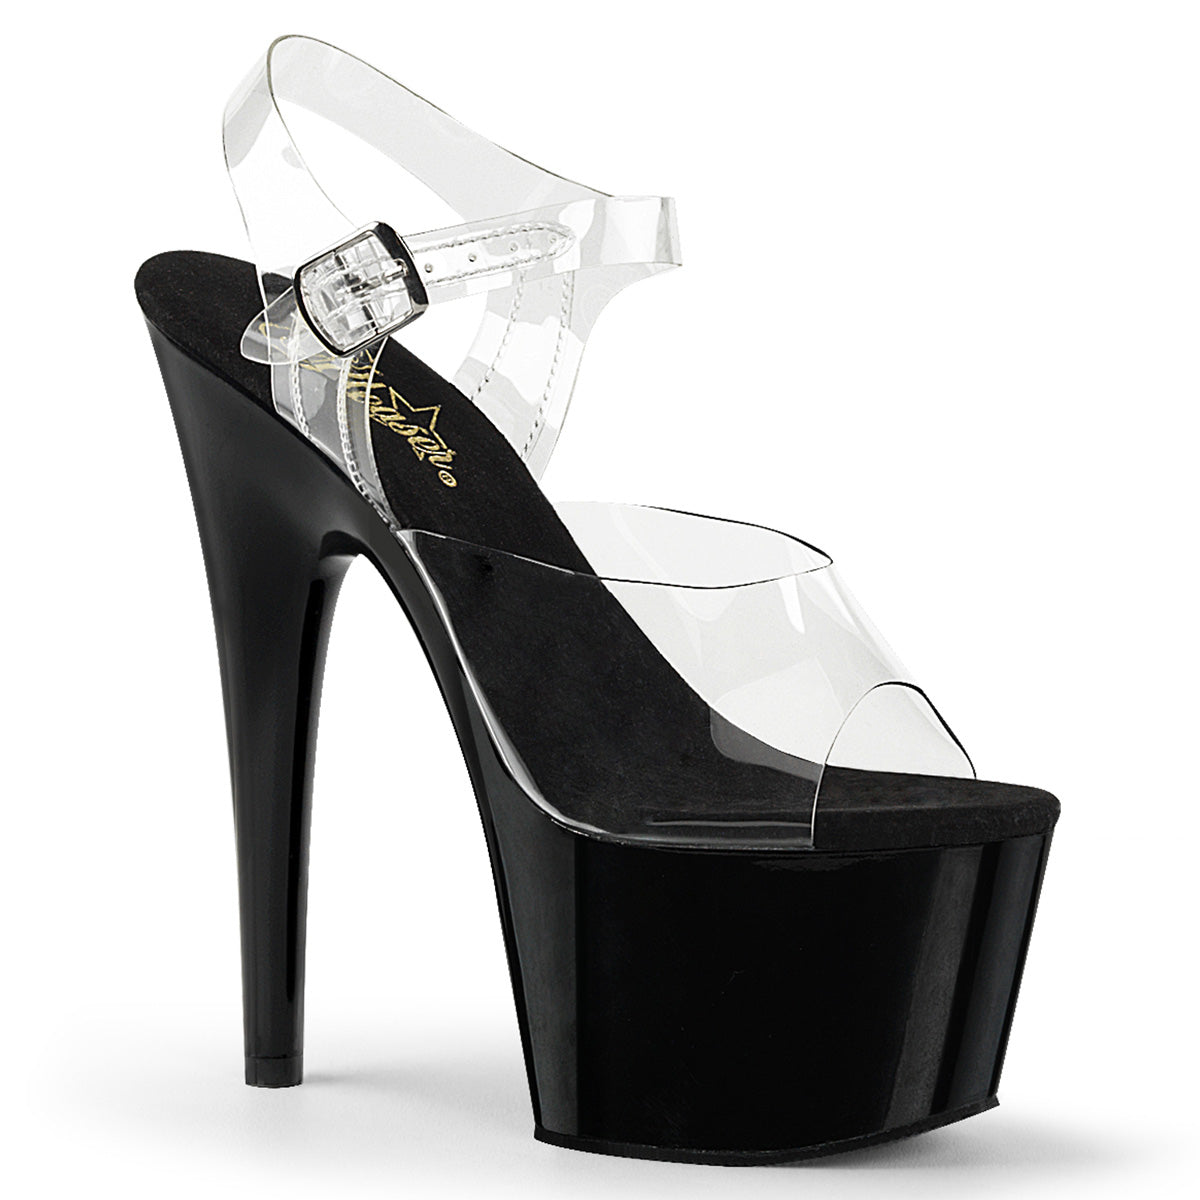 Pleaser Adore 708 Black/Clear - Model Express Vancouver